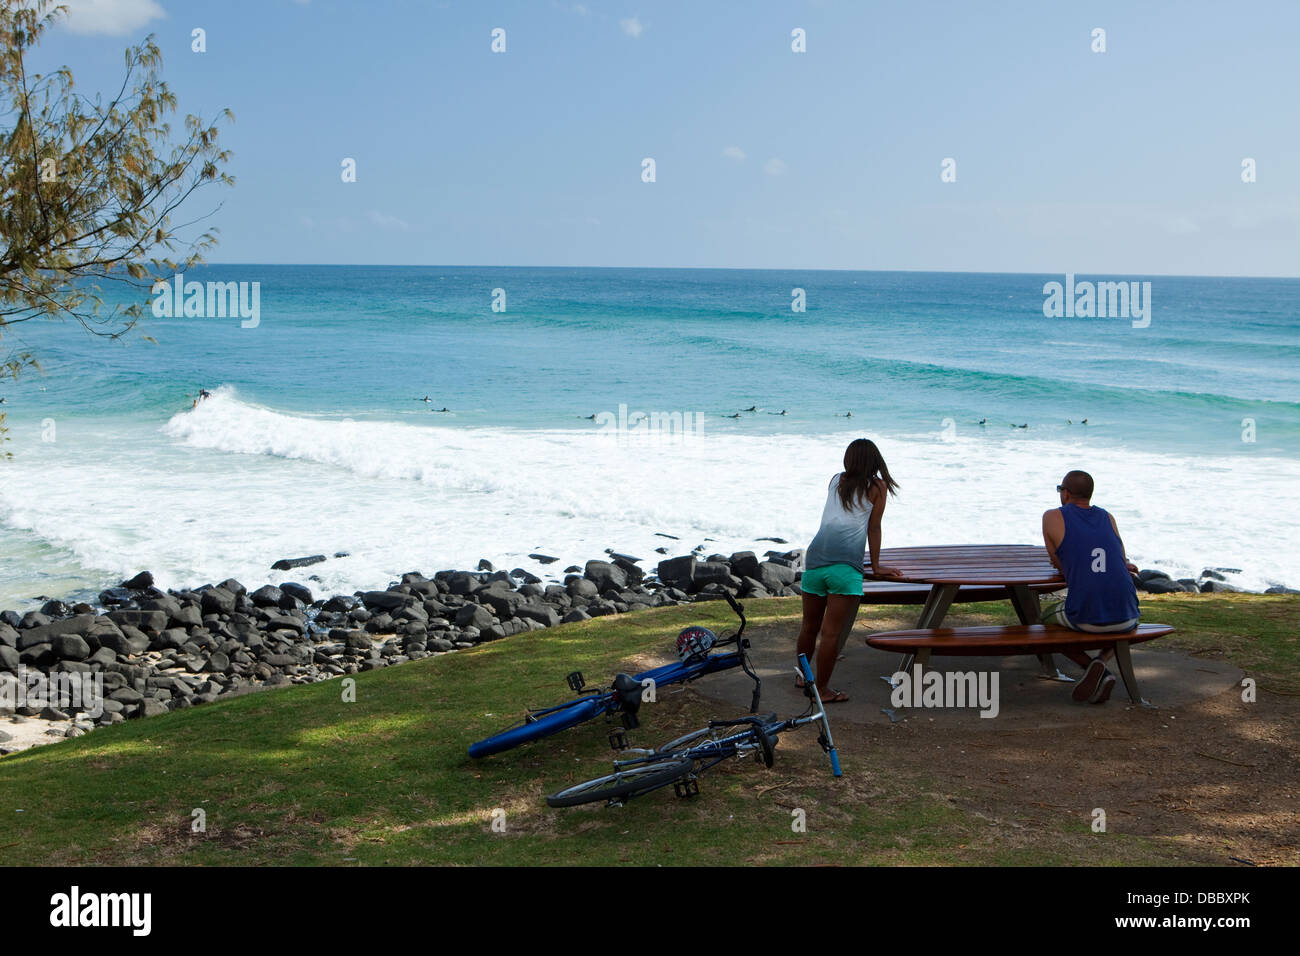 People watching surfers from hillside at Burleigh Heads, Gold Coast, Queensland, Australia Stock Photo